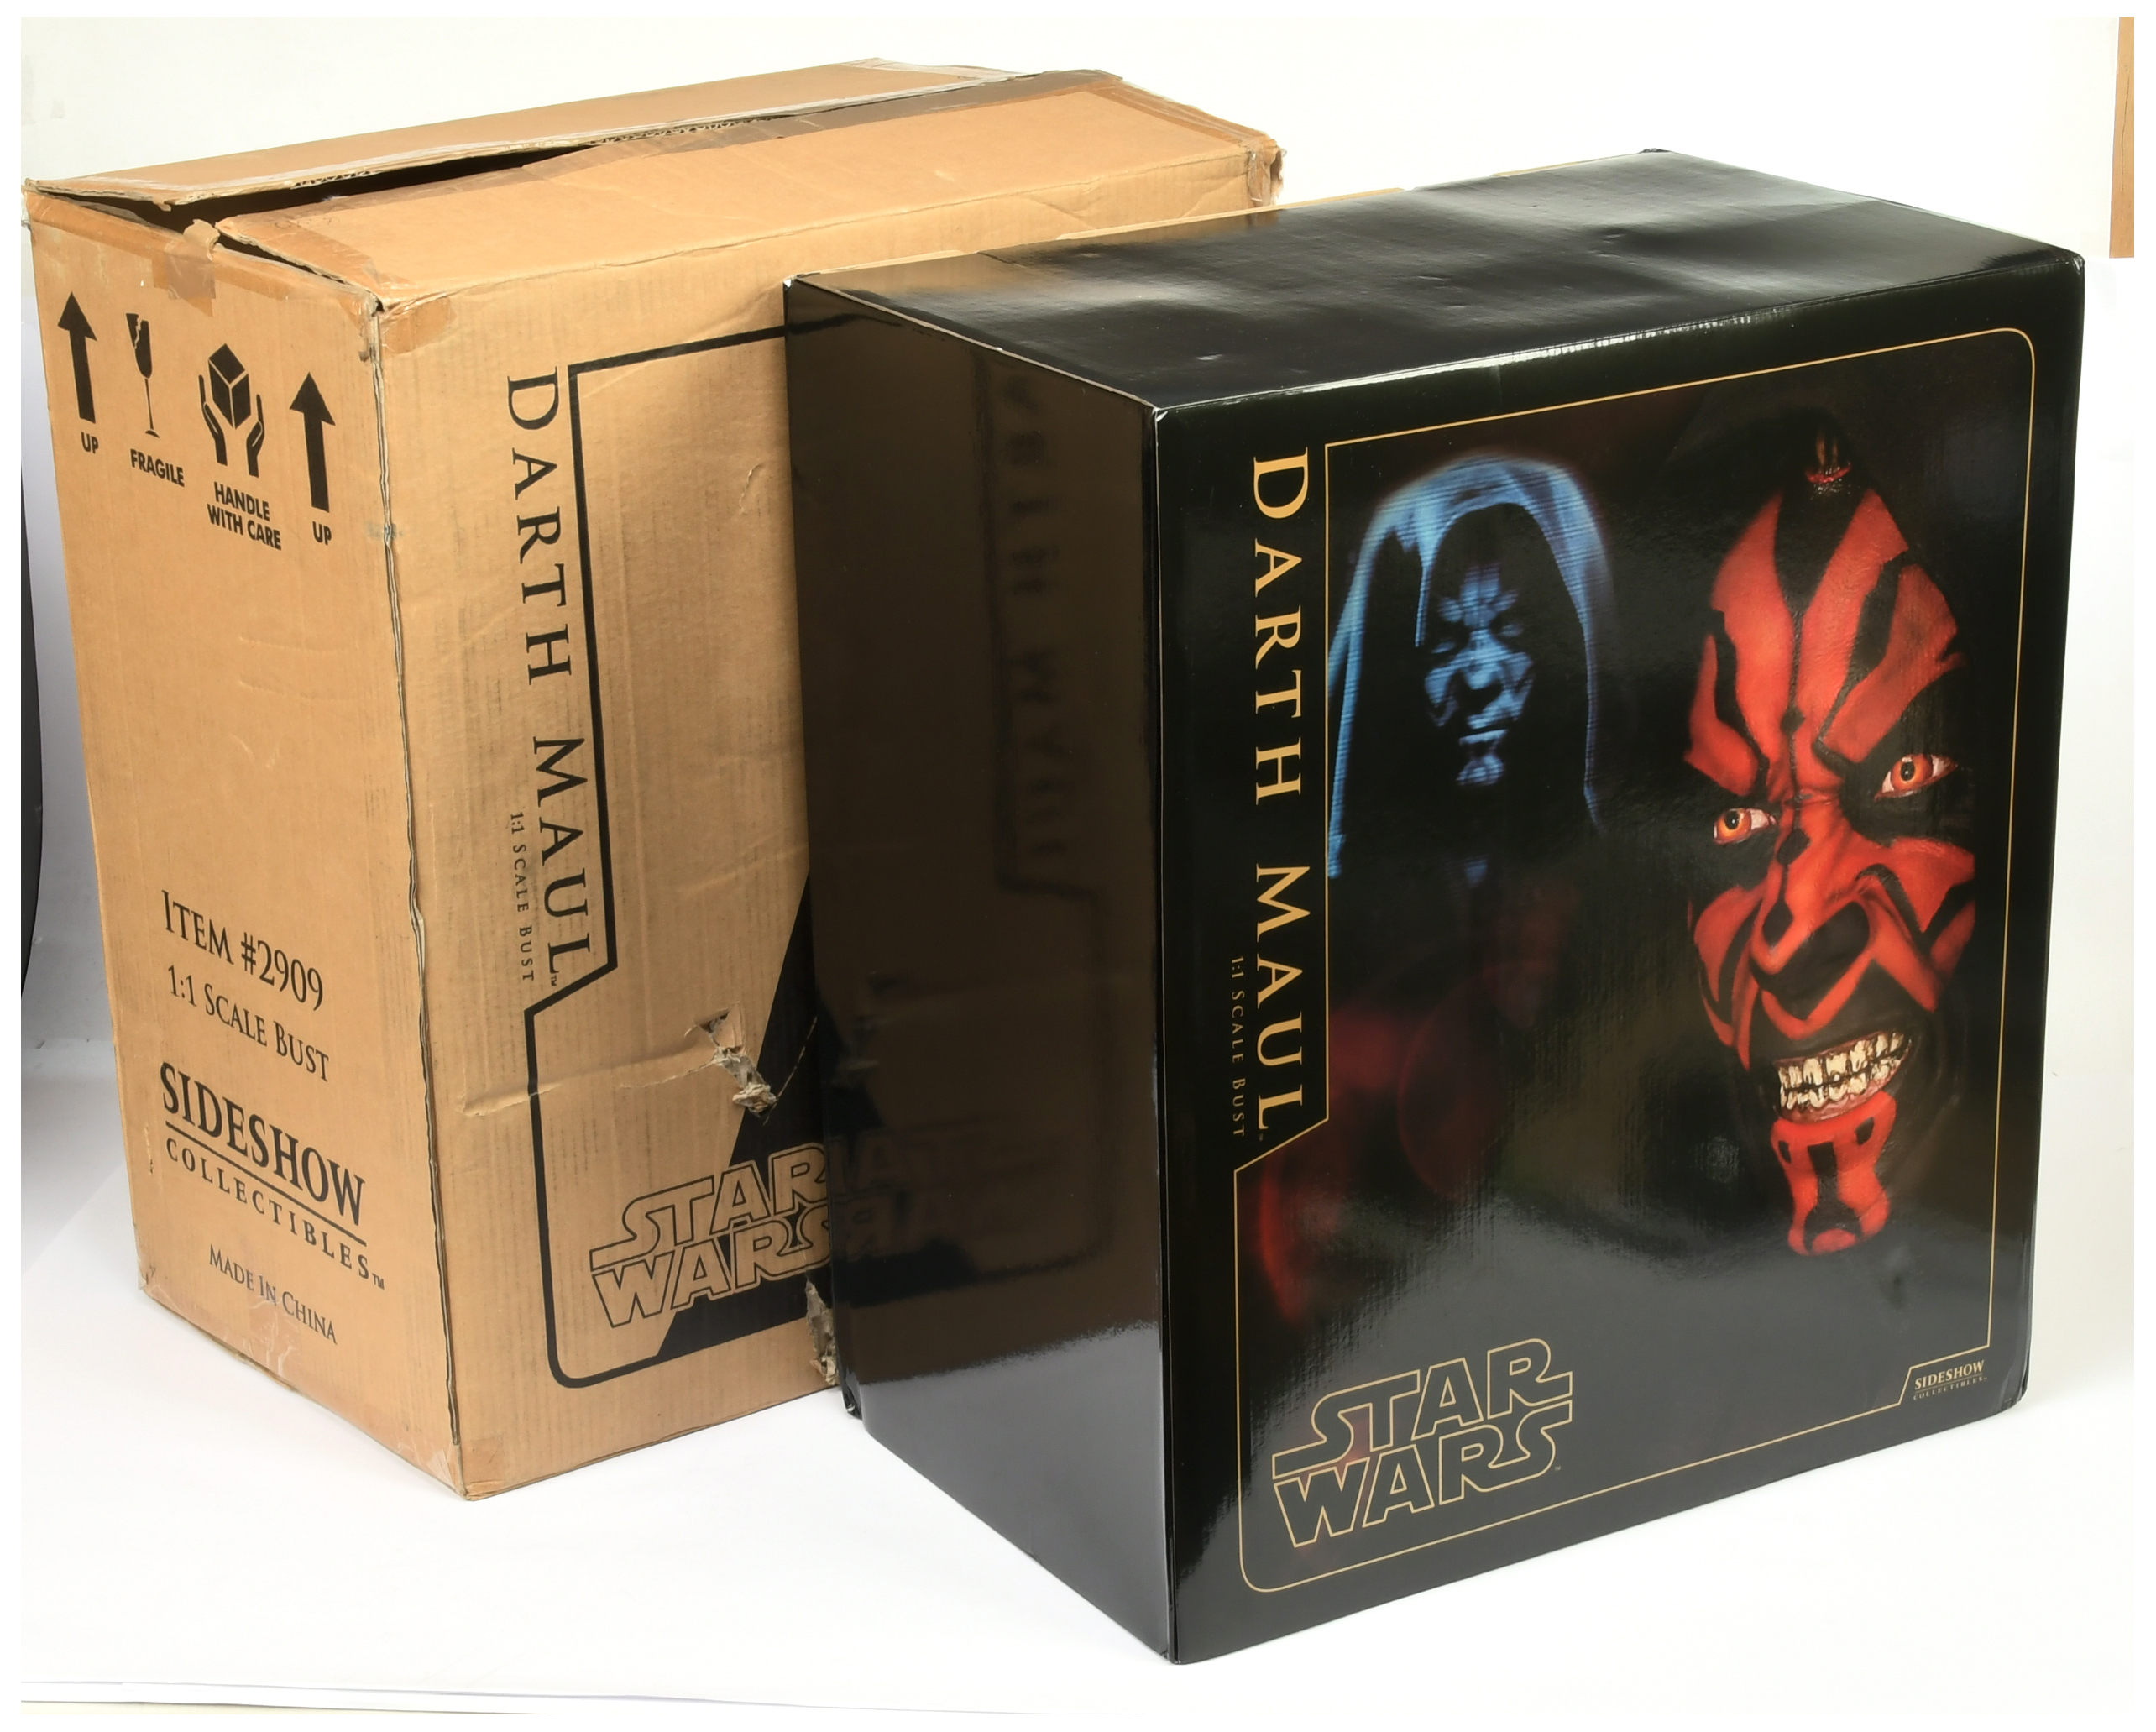 Sideshow Star Wars Episode 1 Darth Maul 1:1 scale life size Bust